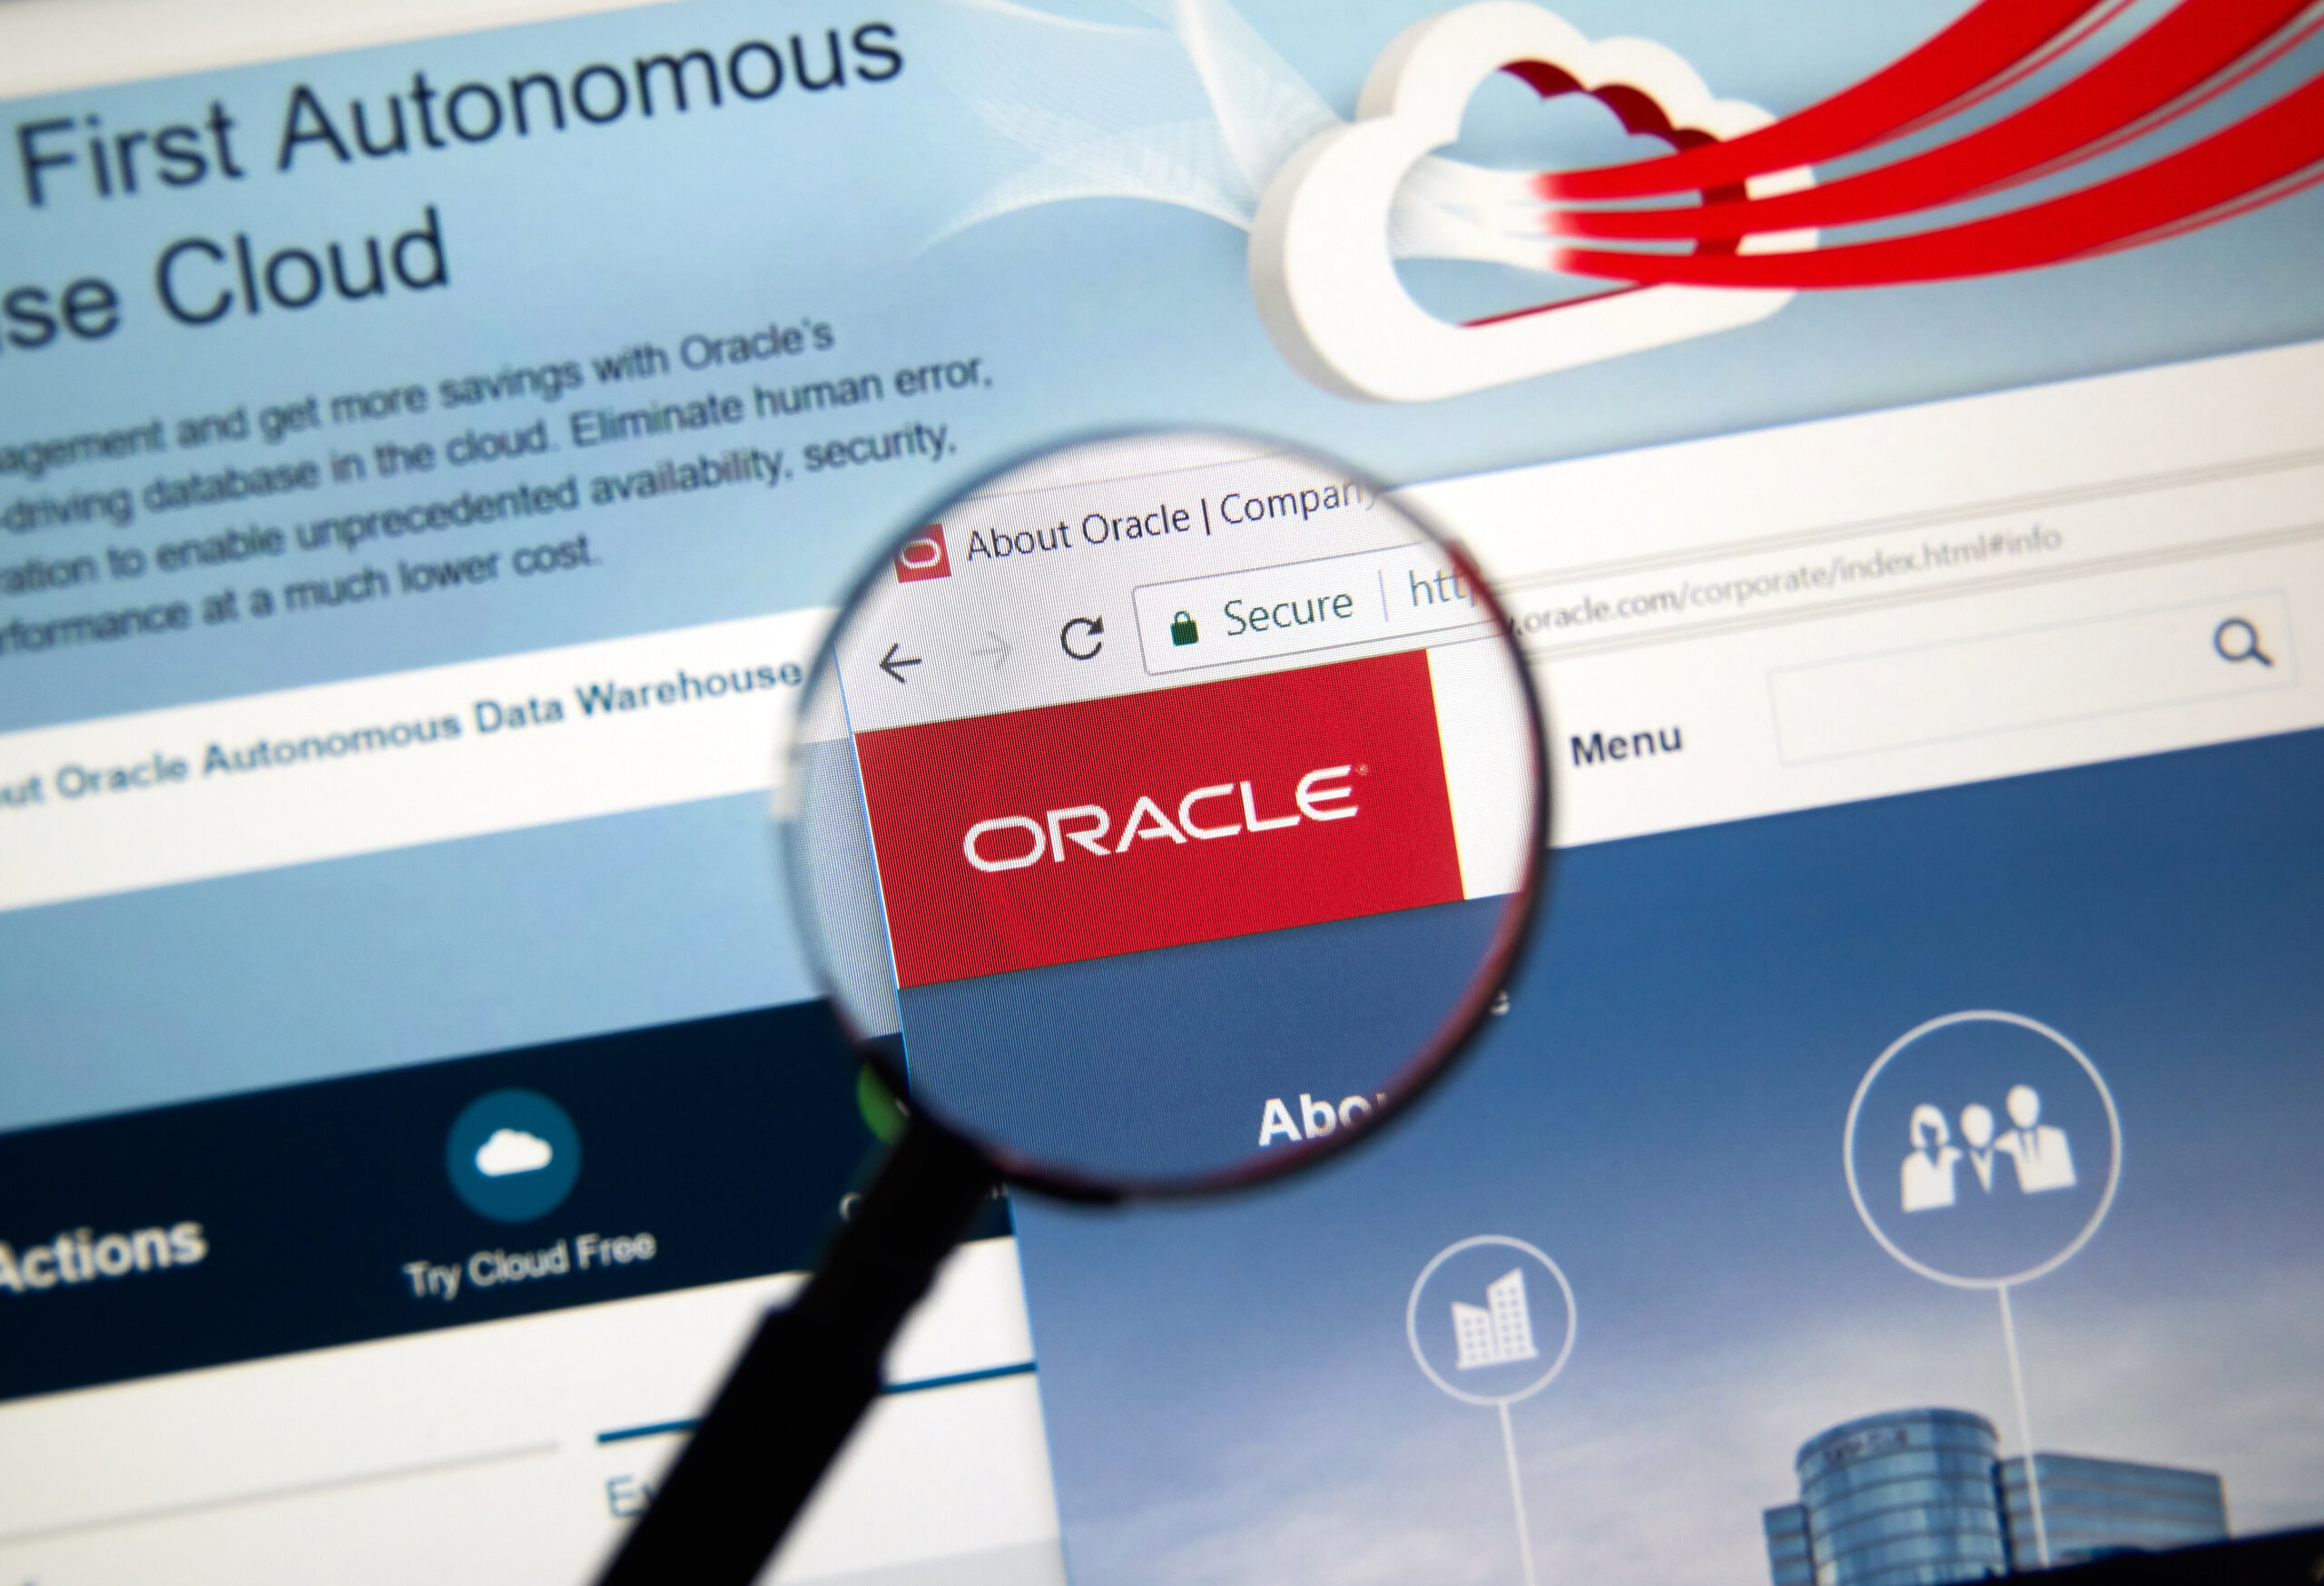 What are the implications of the Oracle Java licensing changes?